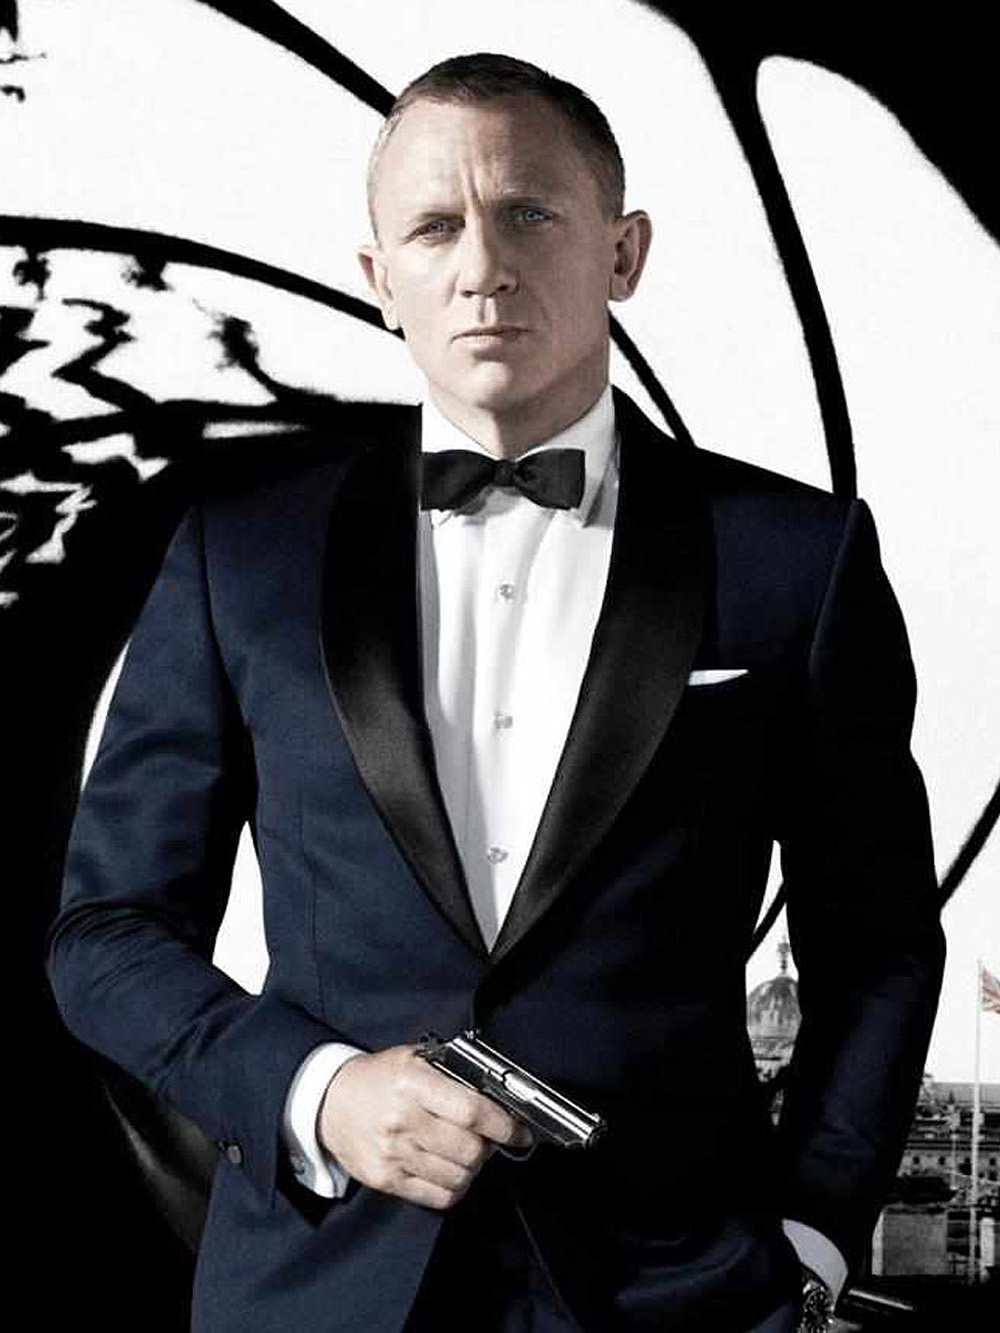 Movie Buff's Reviews: GLOBAL JAMES BOND DAY OCTOBER 5, 2015